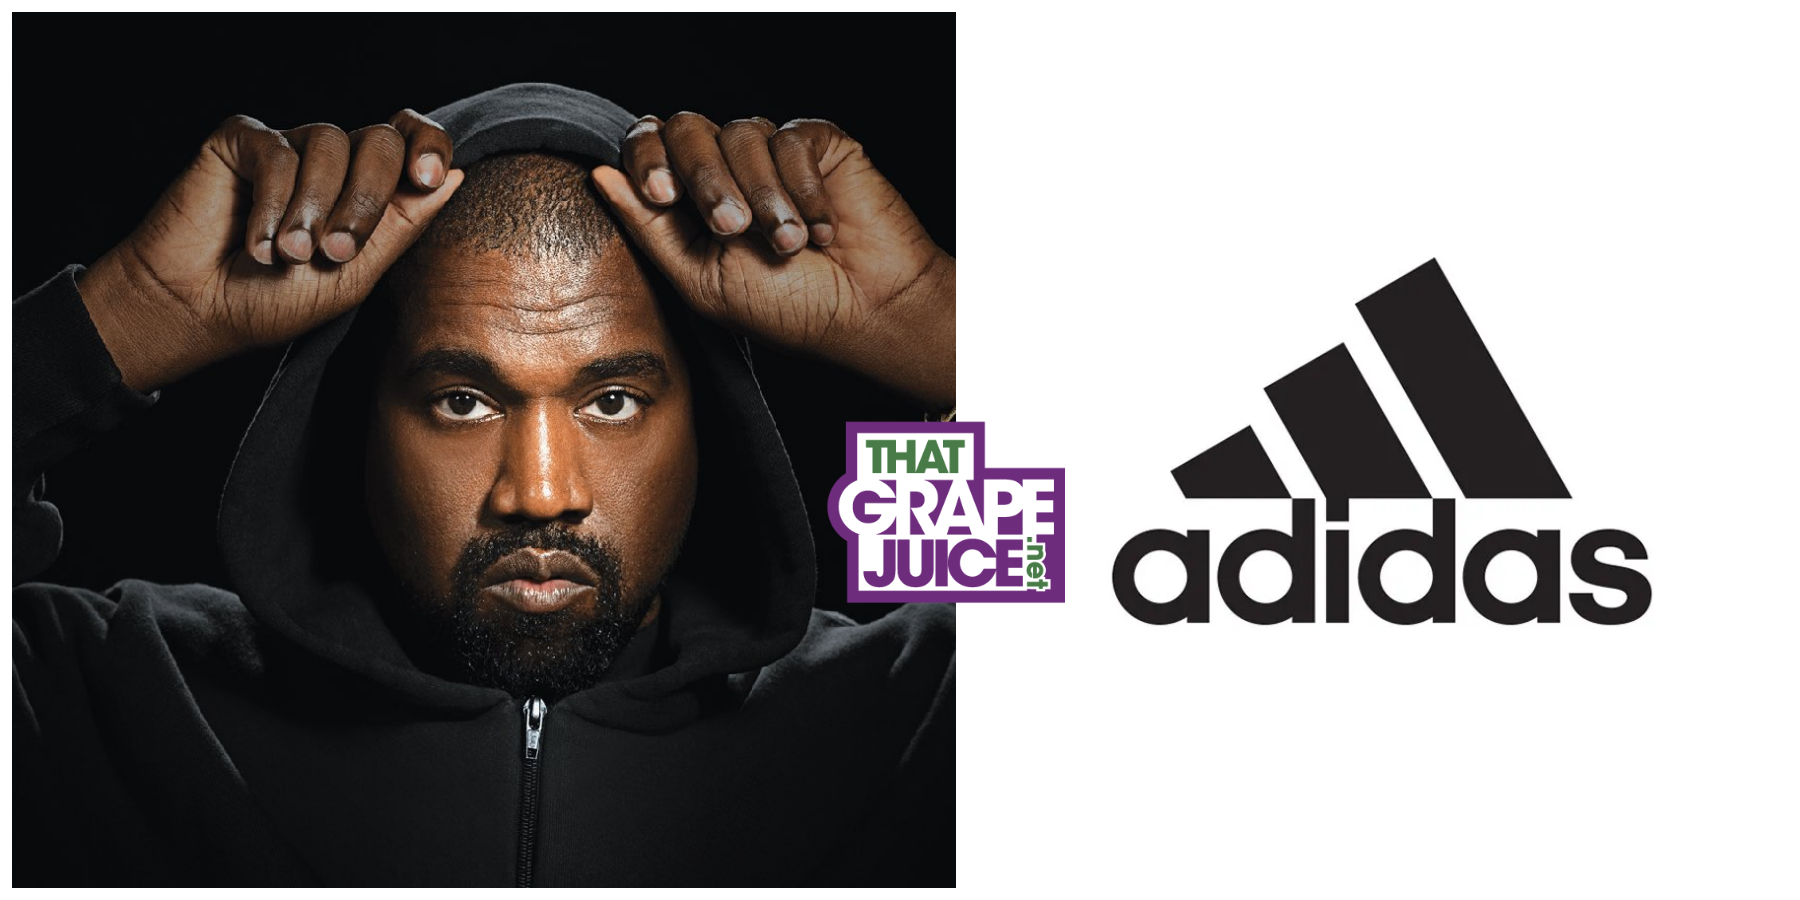 Report: Kanye West No Longer a Billionaire After Adidas Drop SIGNIFICANTLY Reduced His Net Worth